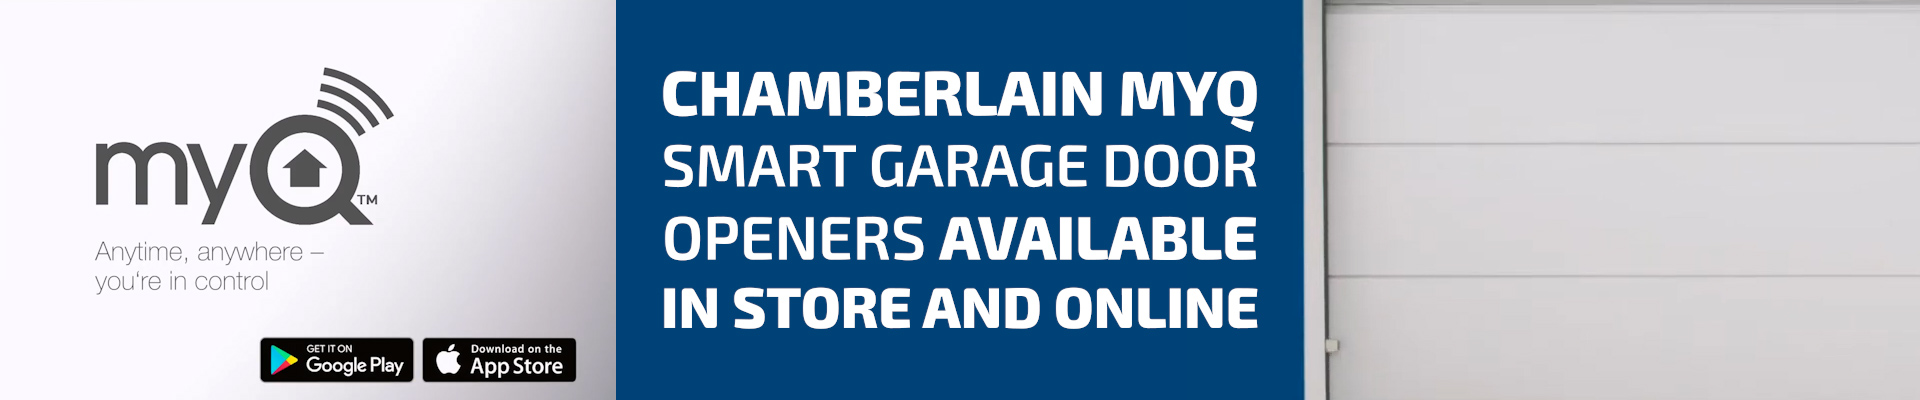 Chamberlain mQ Smart Garage Openers available instore and online